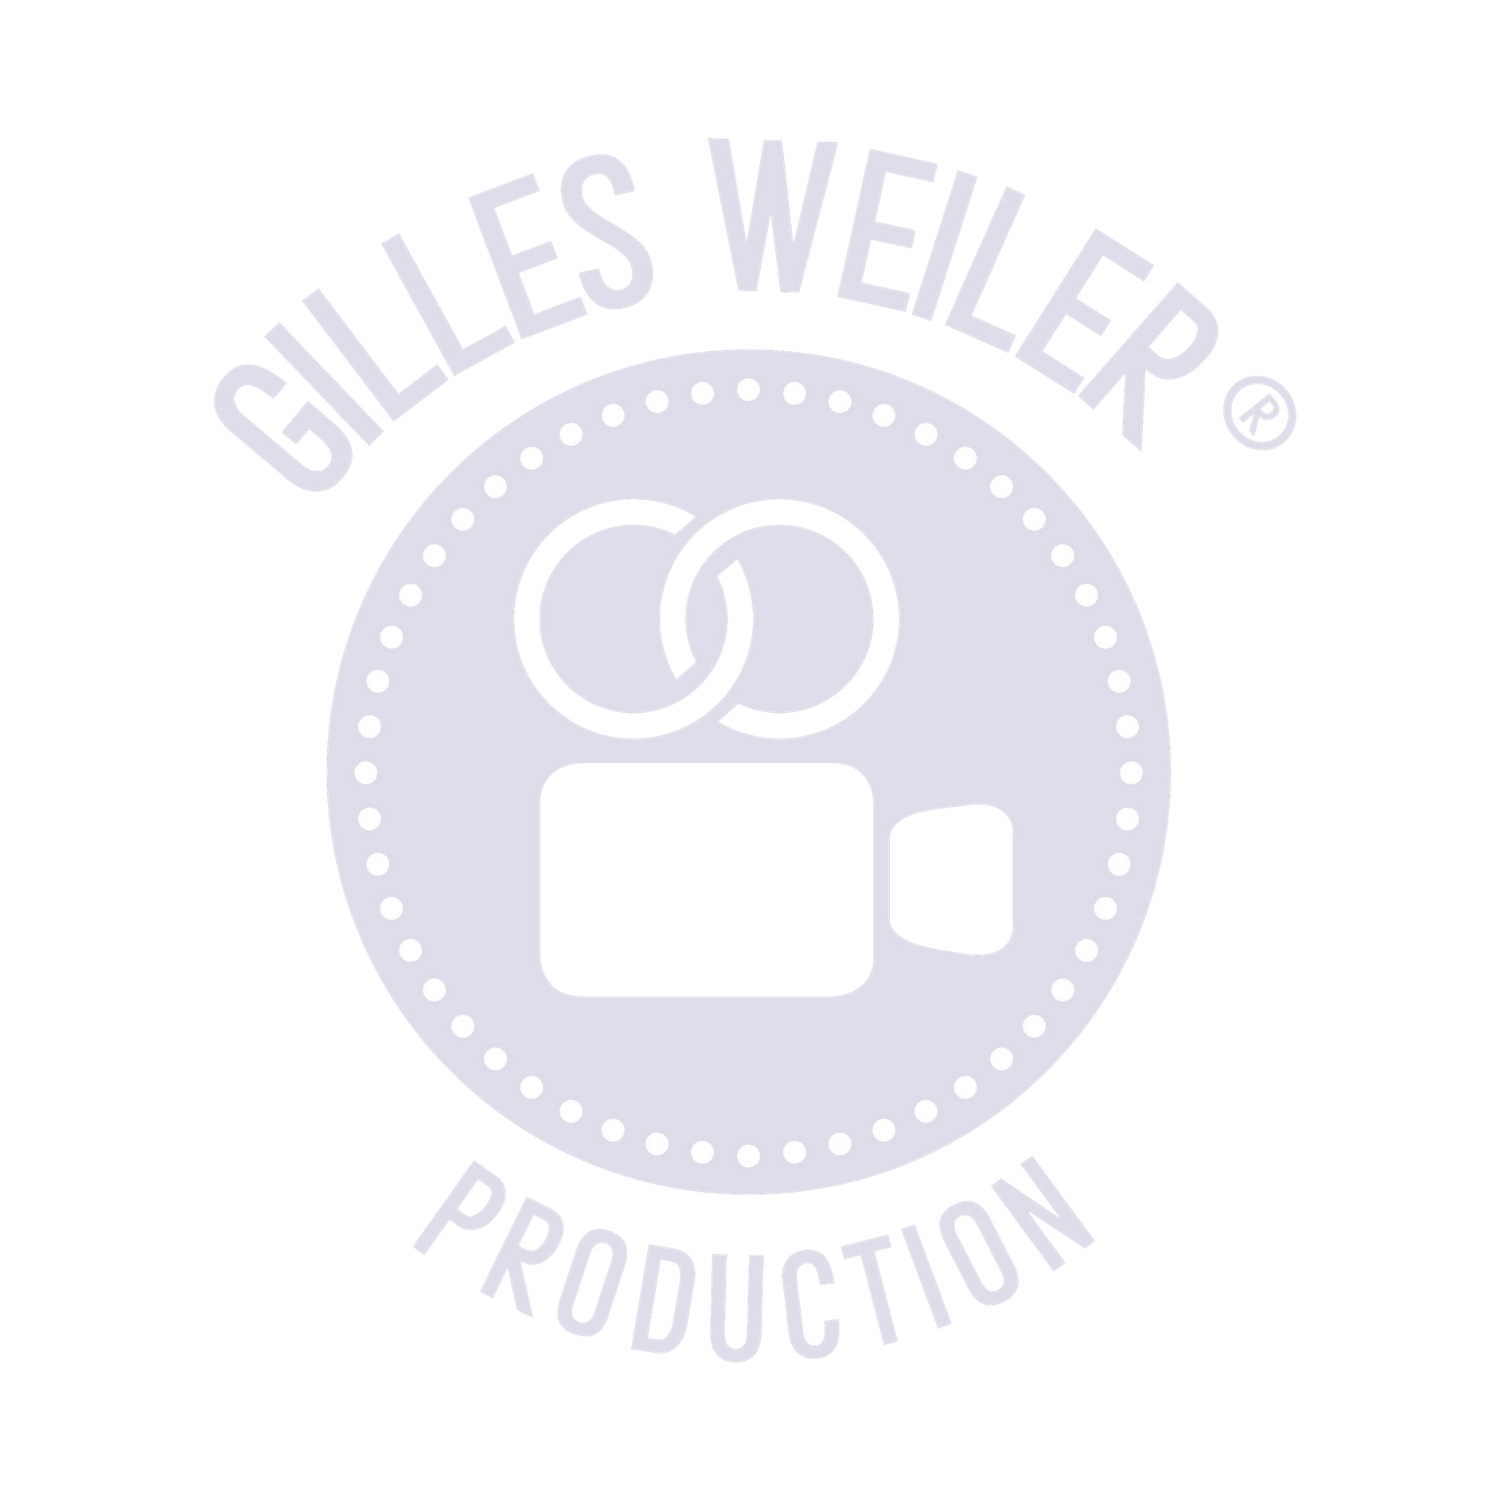 GILLES-WEILER-PRODUCTION